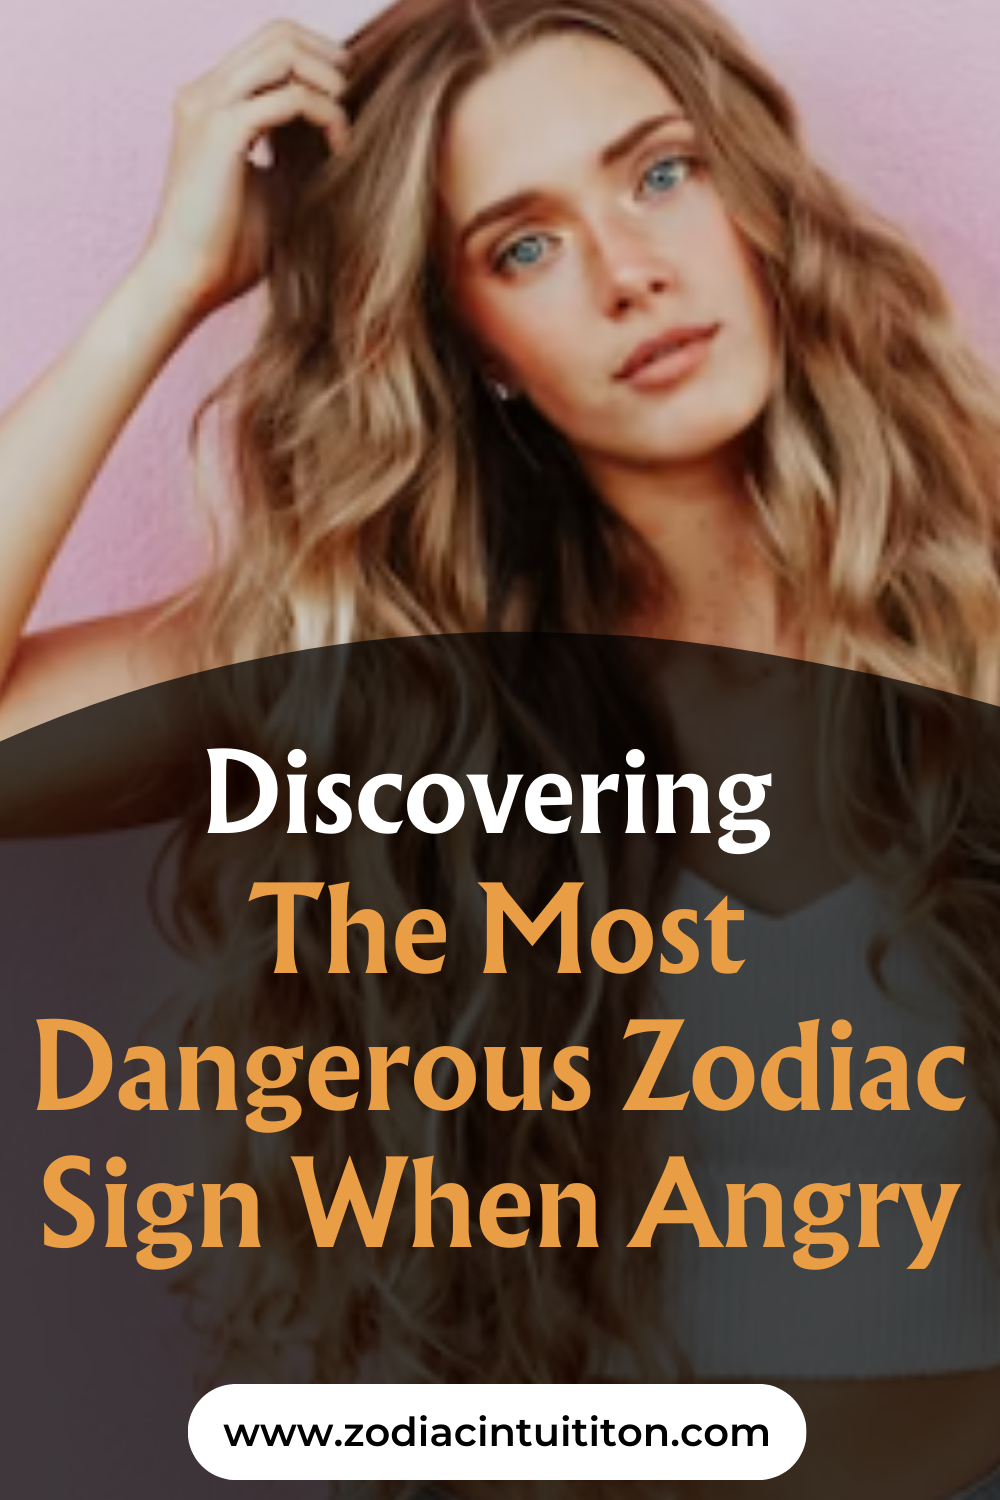 Discovering The Most Dangerous Zodiac Sign When Angry